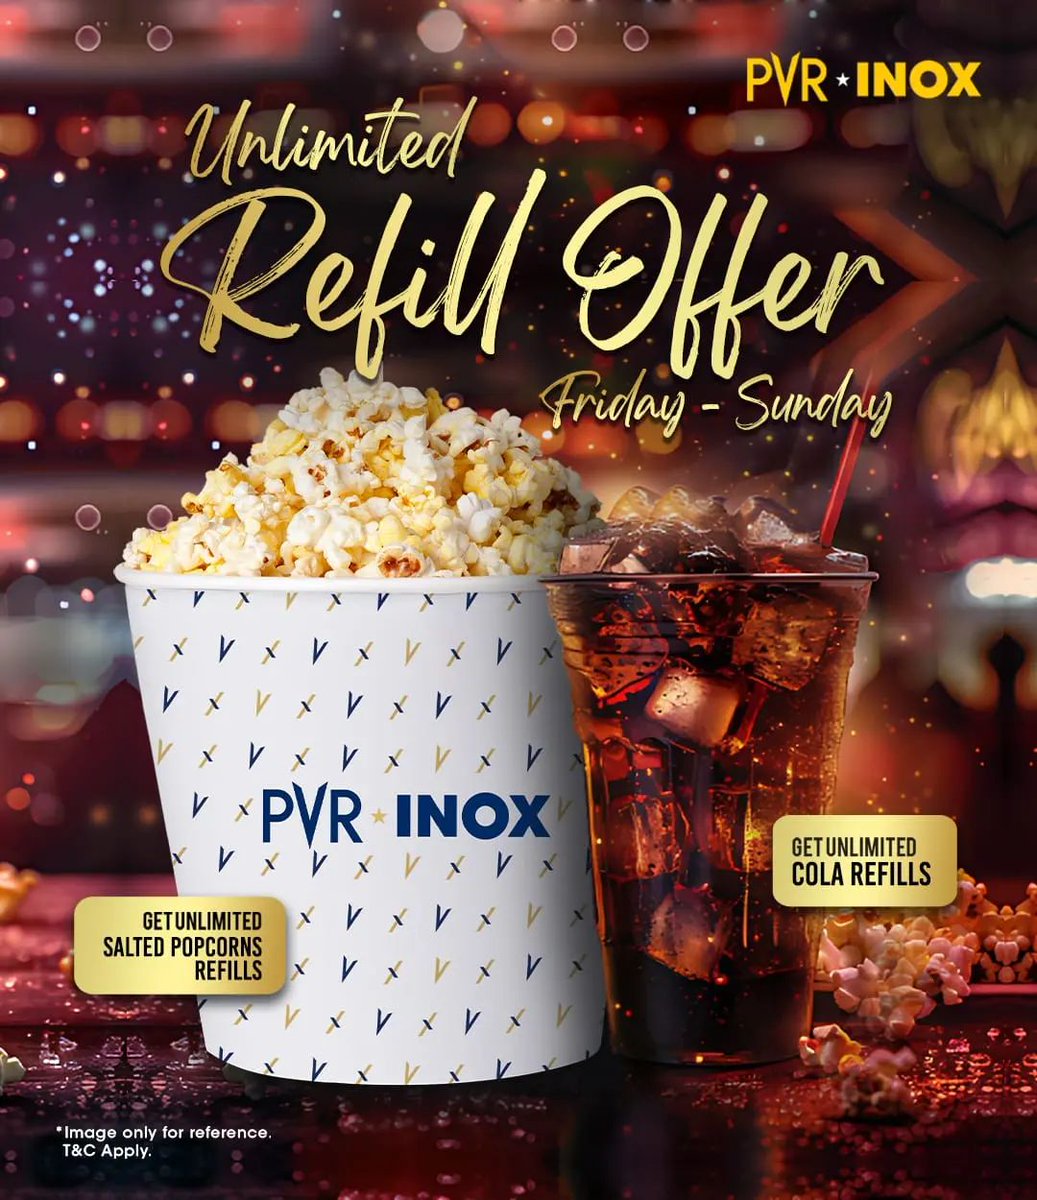 Elevate your movie experience this weekend with unlimited refills of salted popcorn 🍿 and cola from Friday to Sunday! 🥤🎬

Visit your nearest #PVRINOX this weekend.
.
.
.
*T&Cs Apply

#UnlimitedRefillOffer #Tasty #Popcorn #Pepsi #UnlimitedRefills